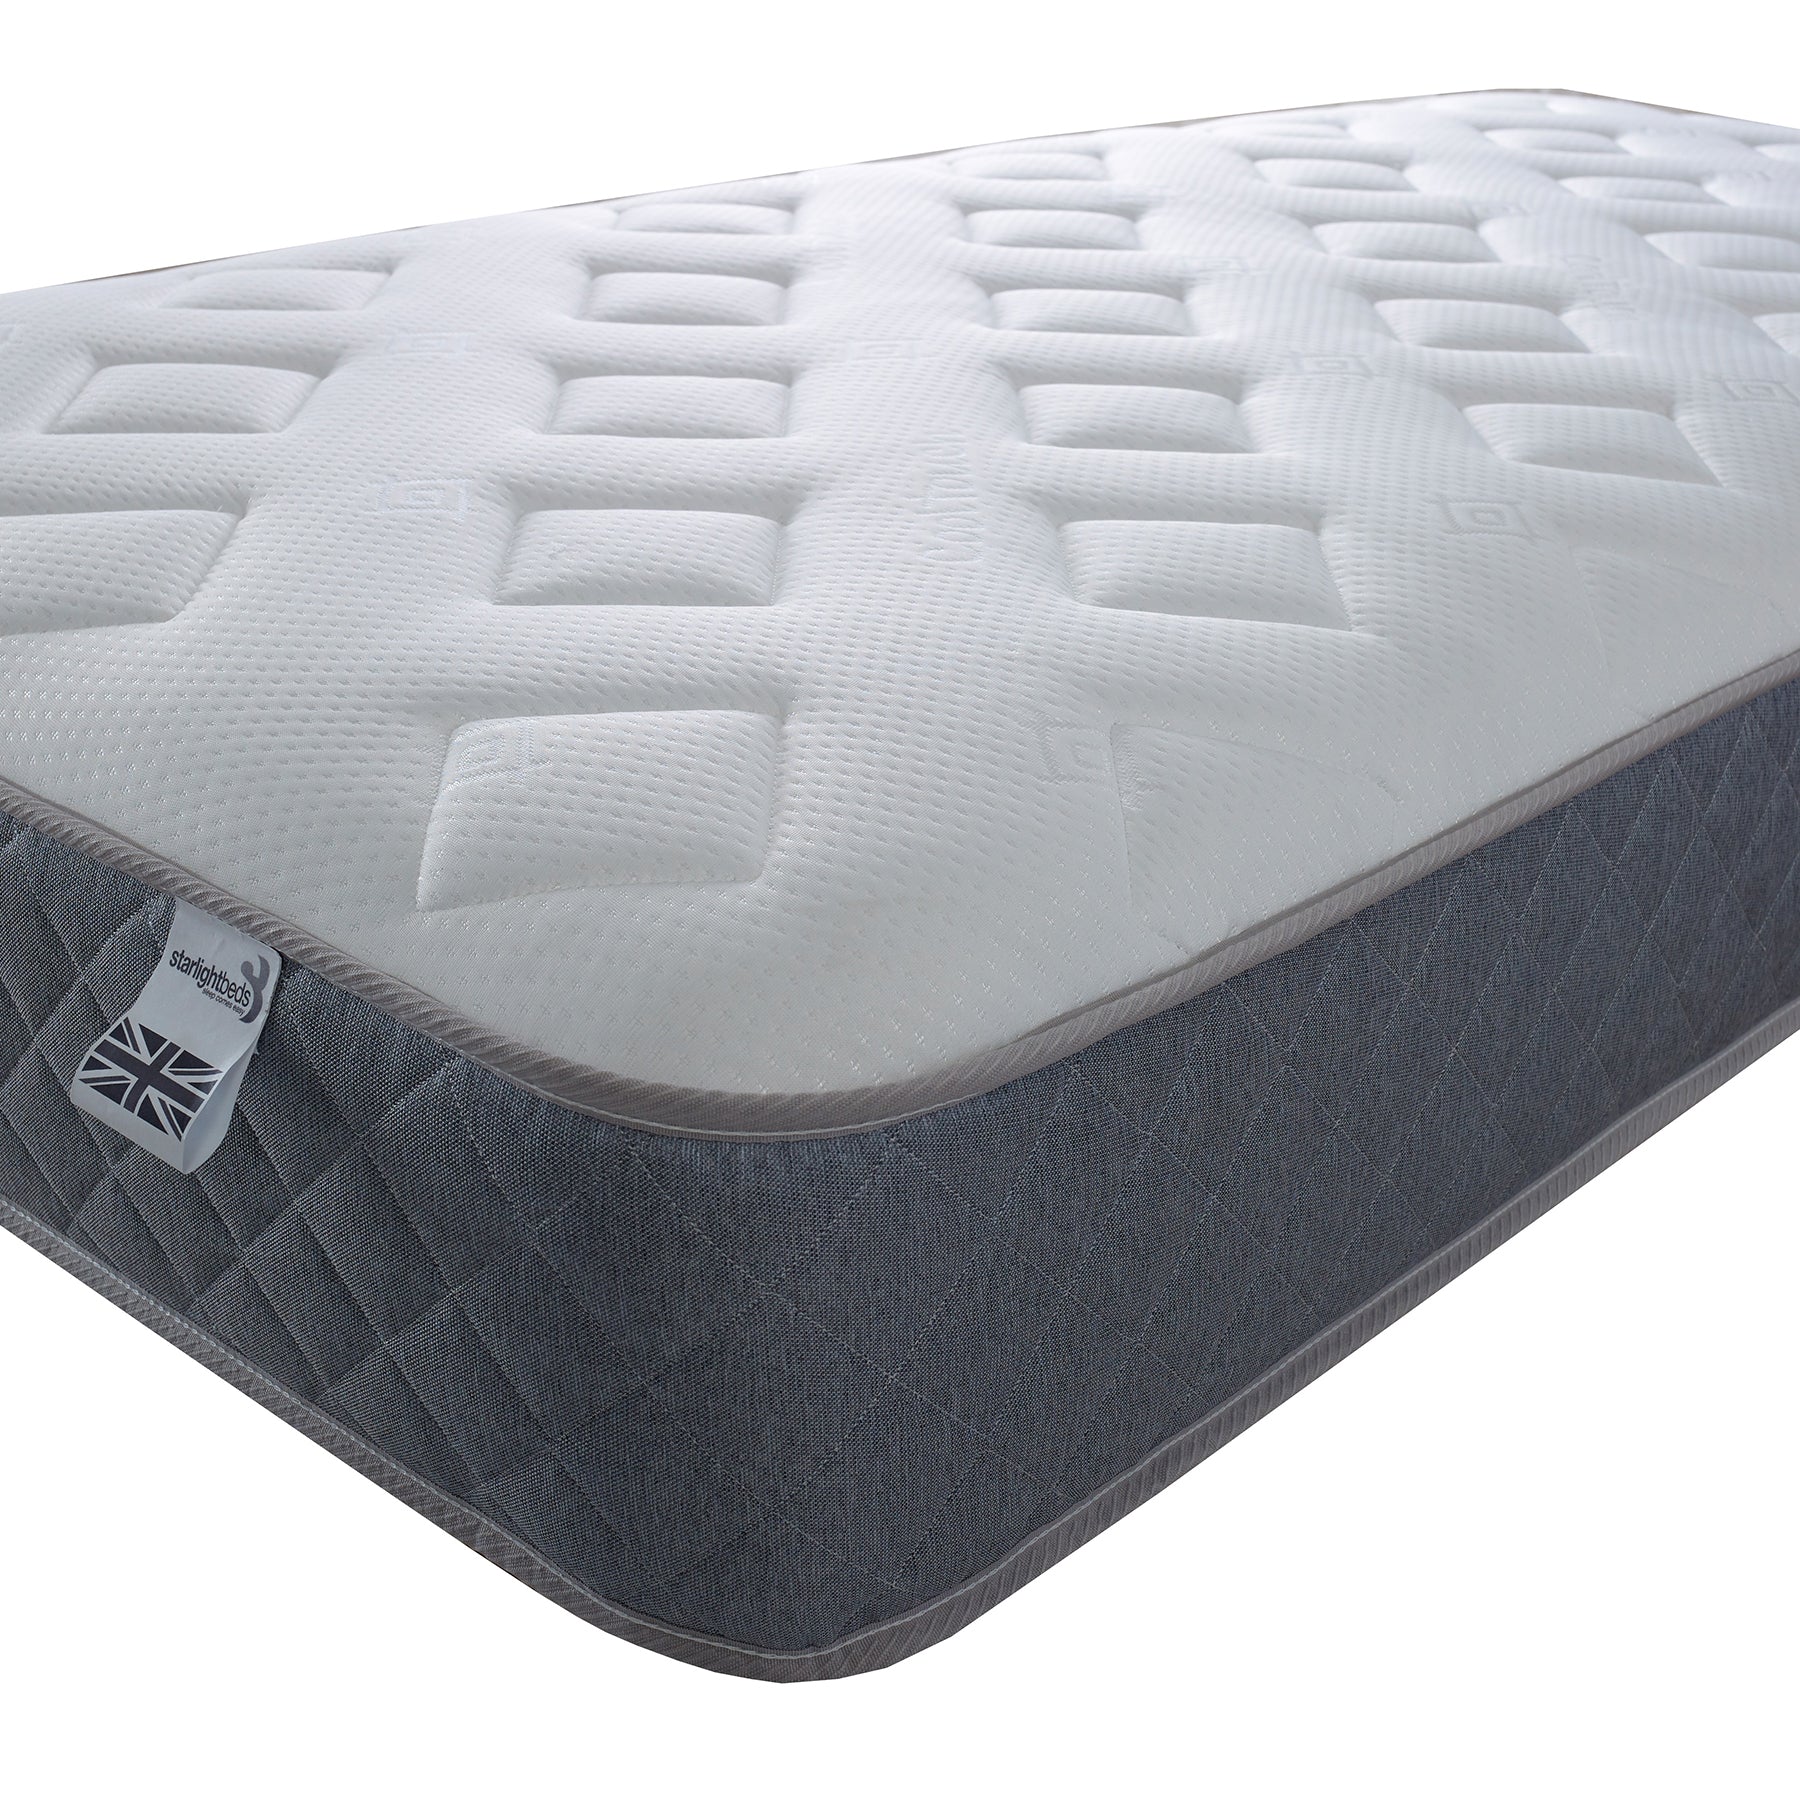 Starlight Beds™ Hybrid Spring & Memory Foam Mattress with Cool Touch Cover